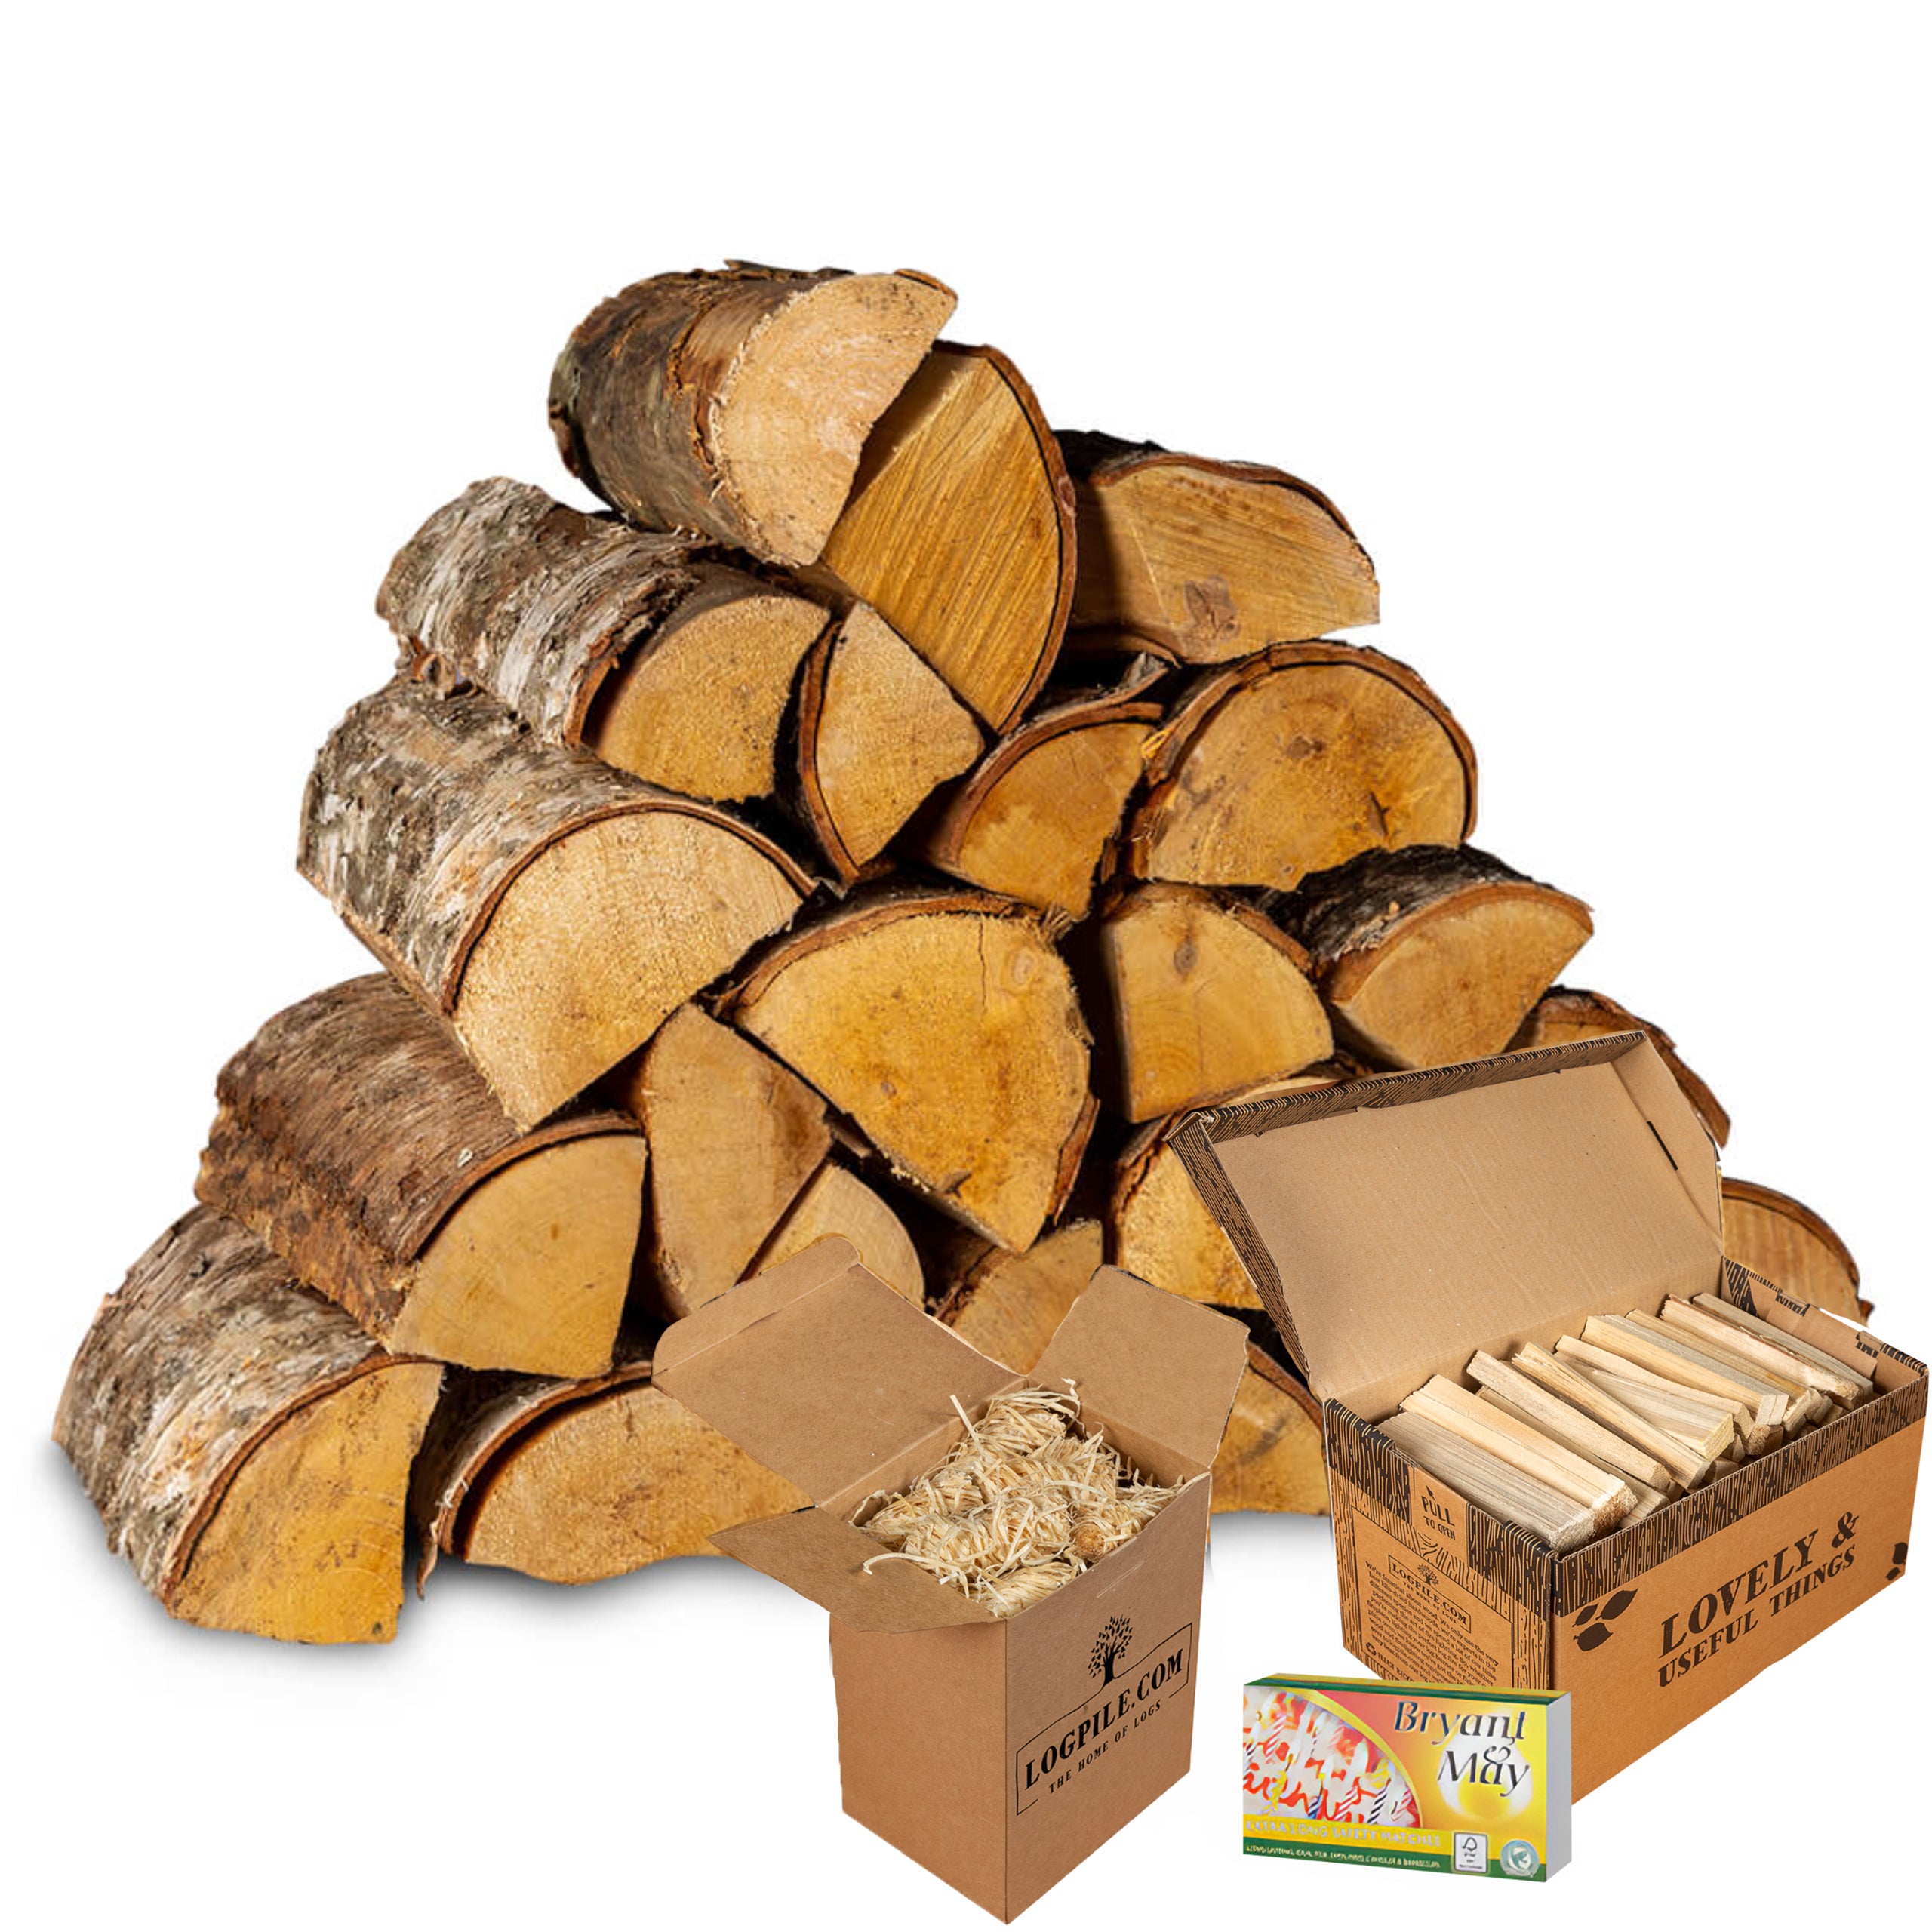 Birch Starter Kit. Kiln Dried Birch Logs, Kindling, Natural Firelighters and Matches